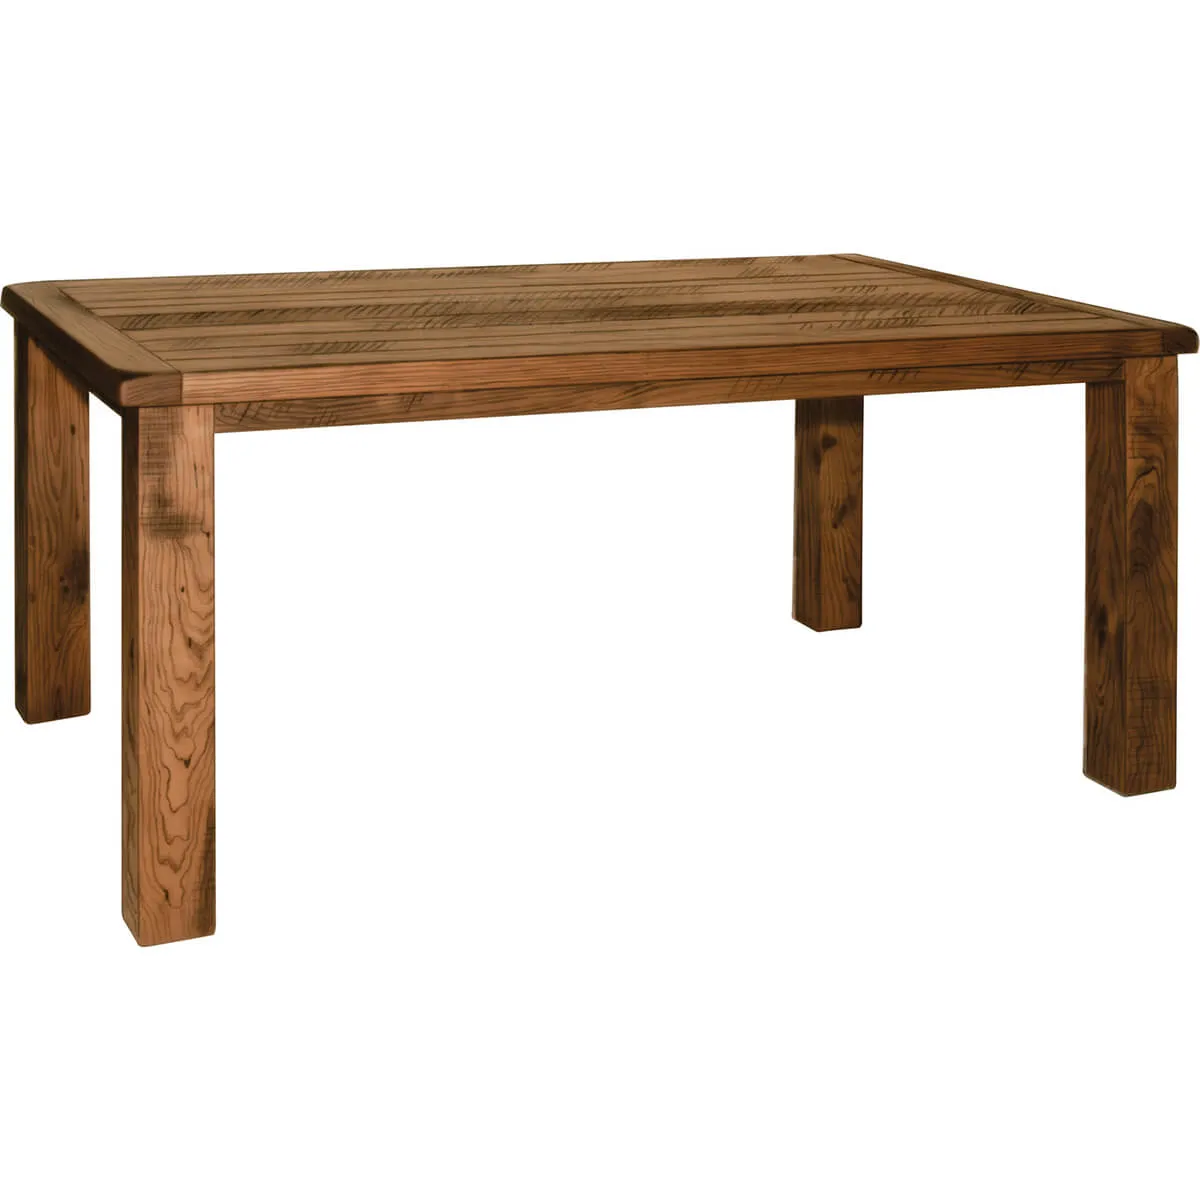 Classic Contemporary Rough Sawn Table